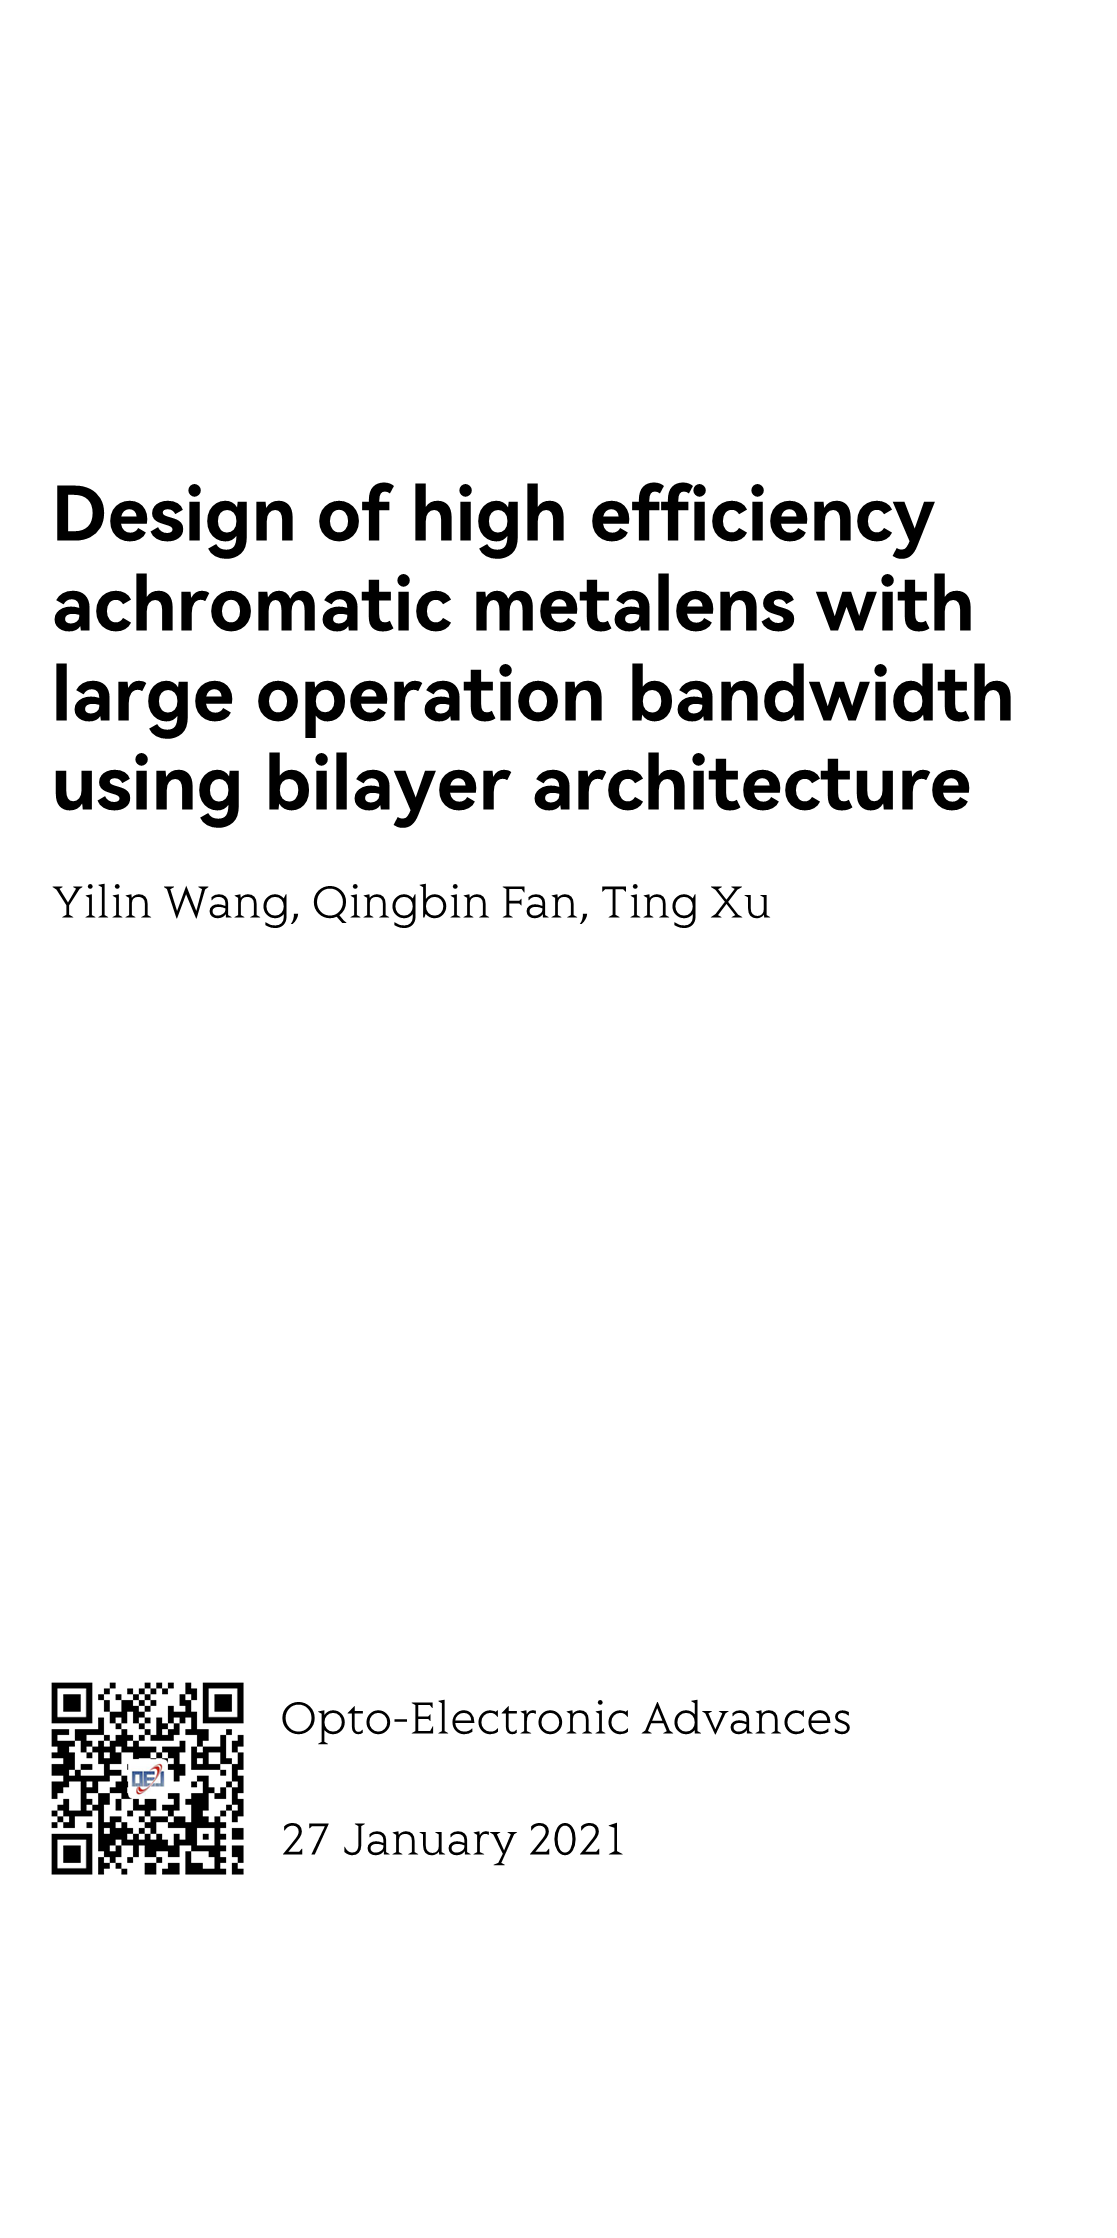 Design of high efficiency achromatic metalens with large operation bandwidth using bilayer architecture_1